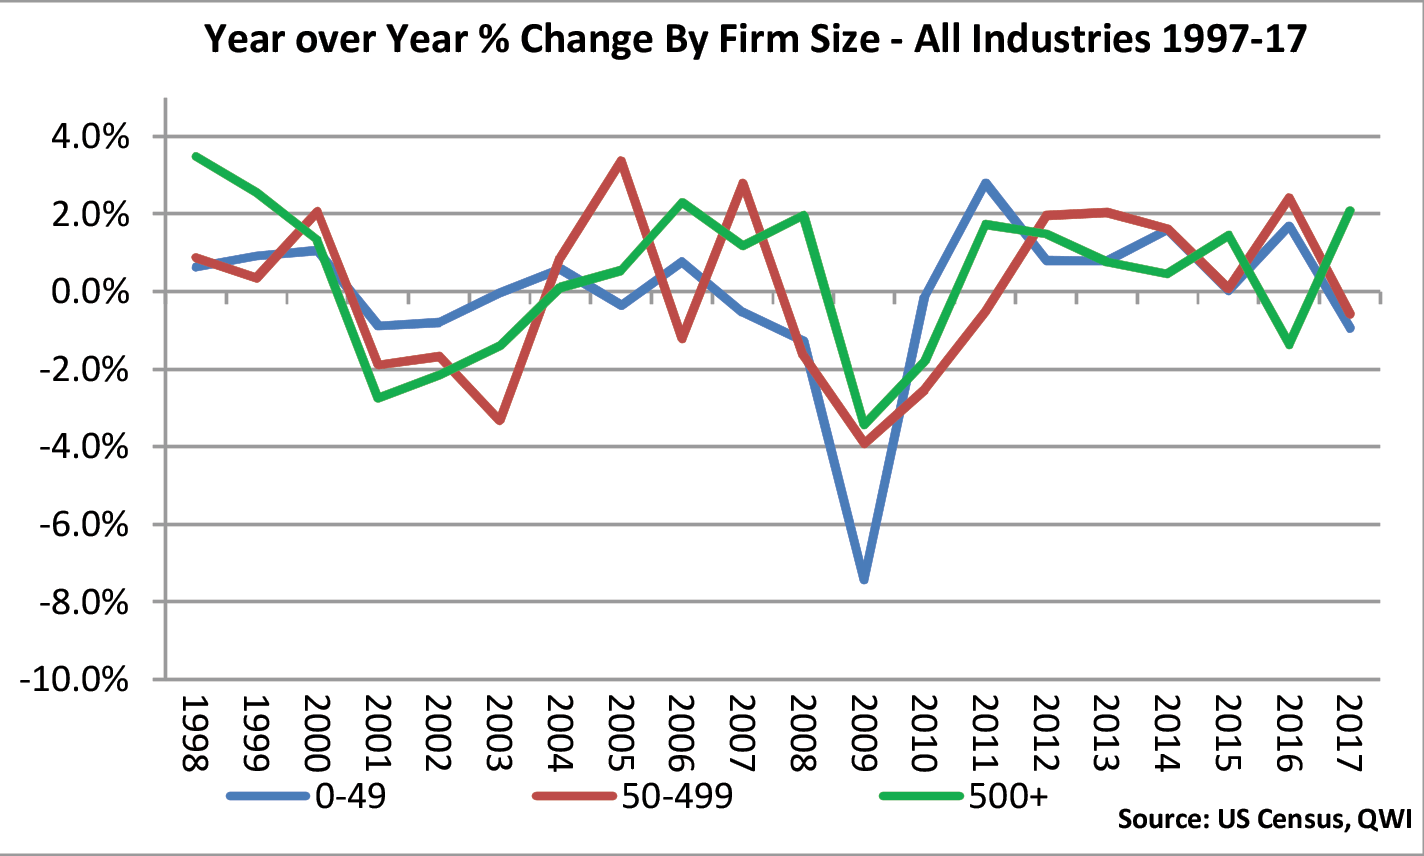 Year over Year % Change By Firm Size - All Industries 1997-17